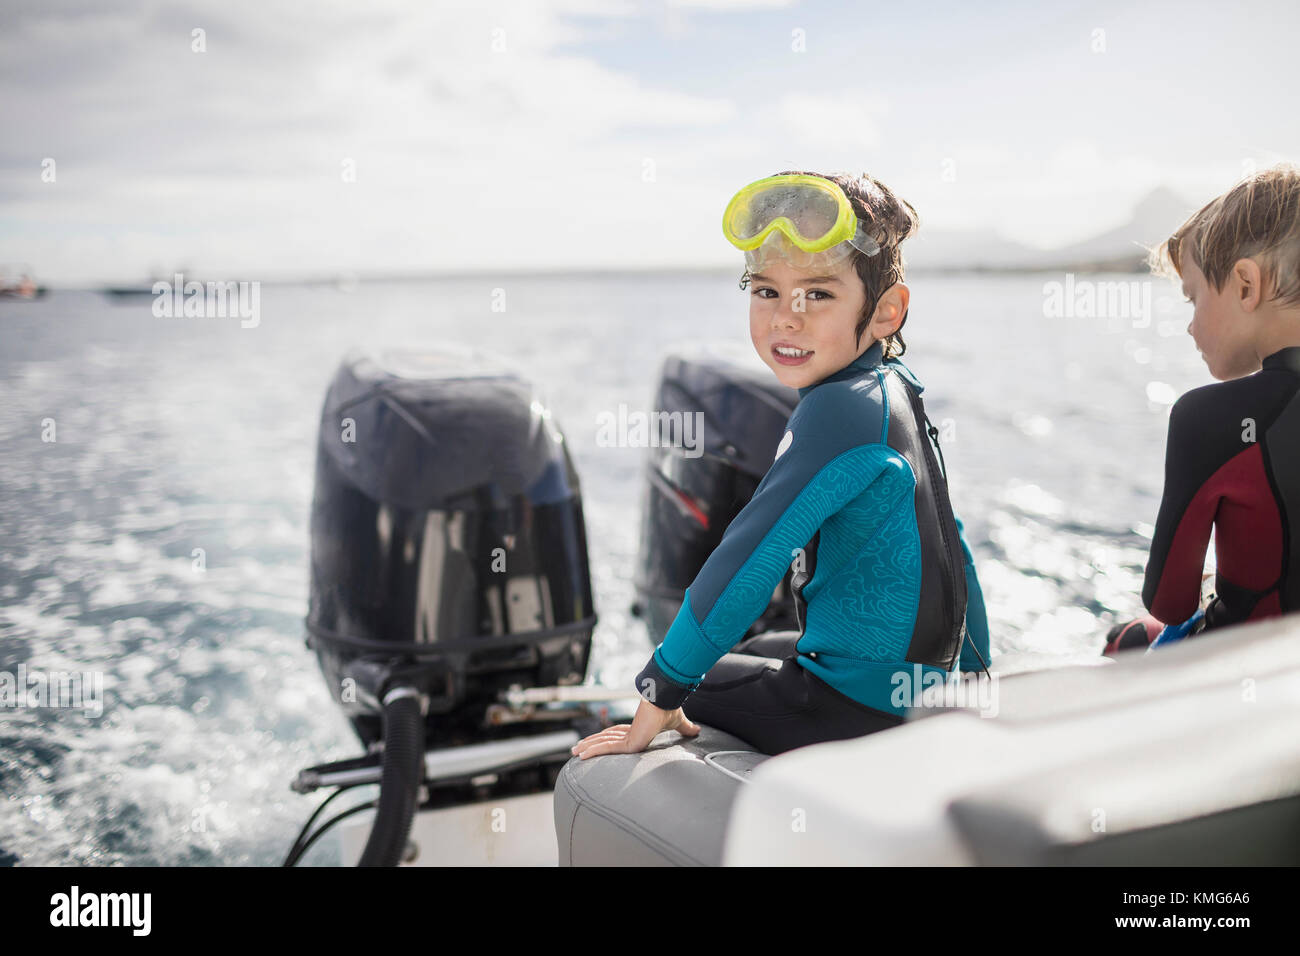 Children with diving mask on a boat Stock Photo